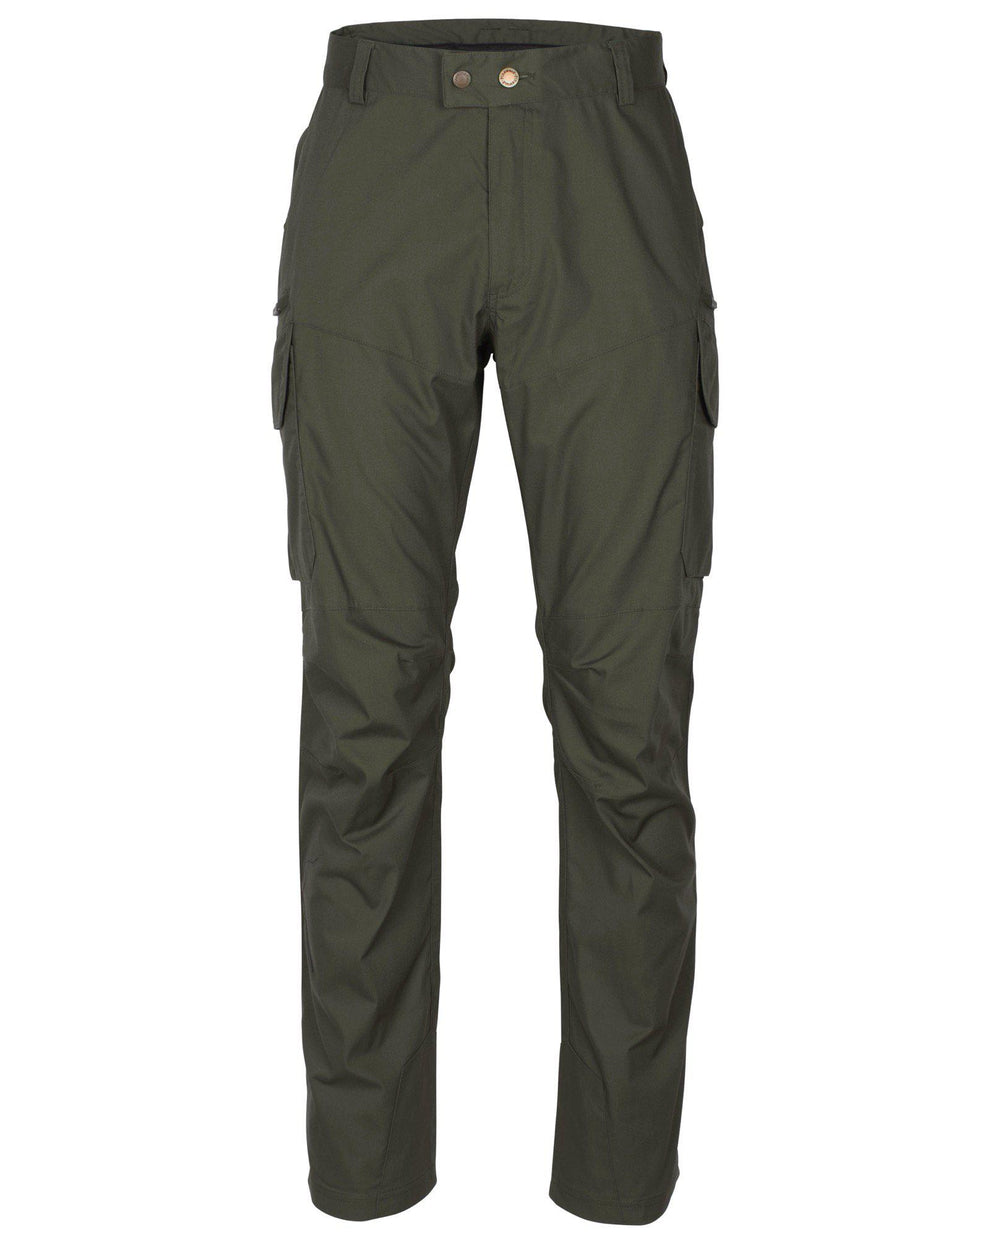 5905-135-01_Småland-Hunters-InsecSafe-Trousers-Mens_MossGreen